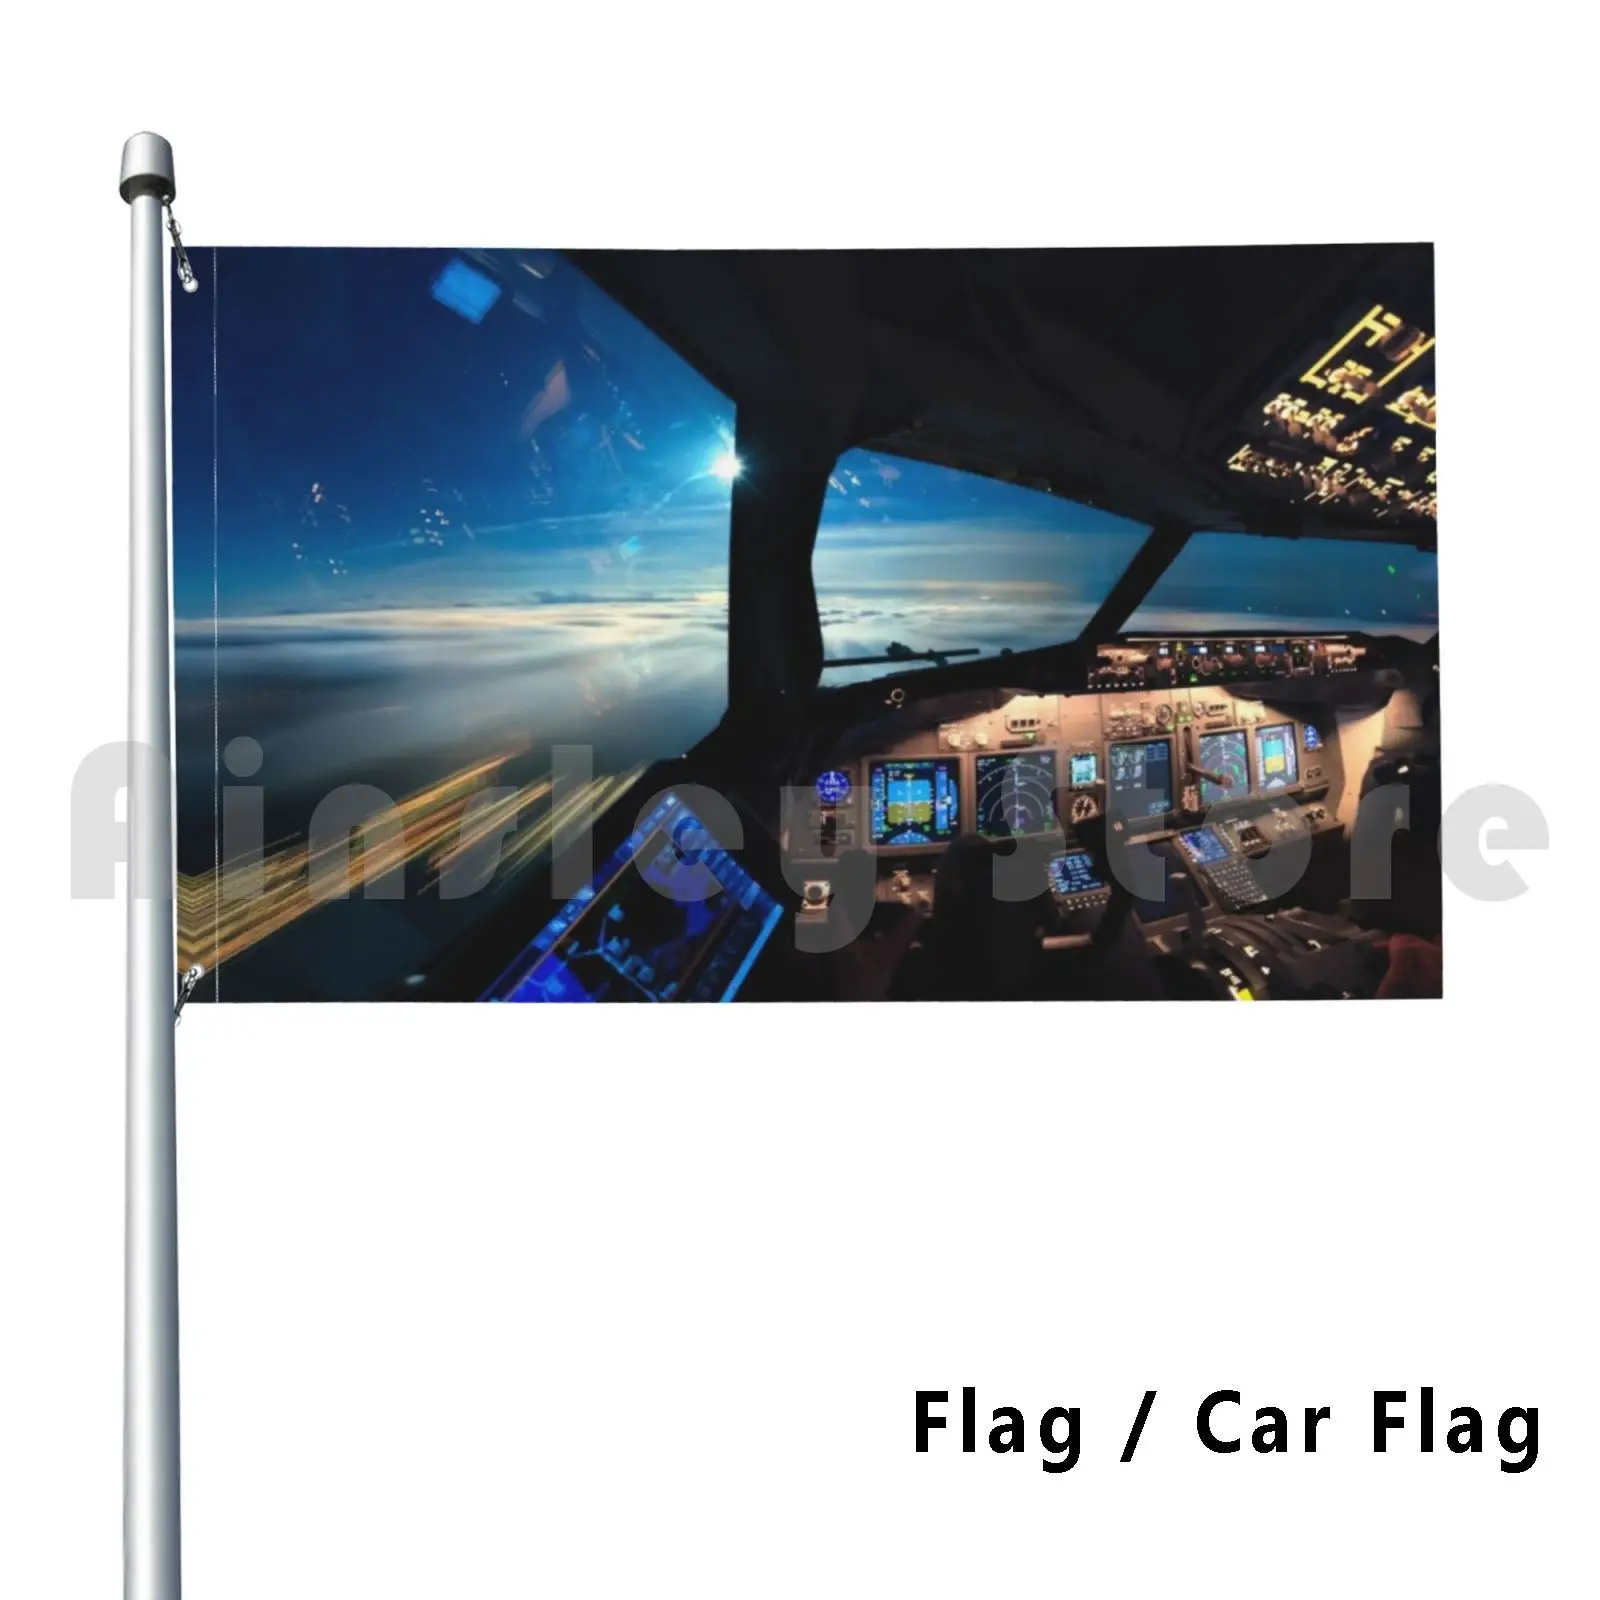 Night Flight Flag Car Flag Funny Airport Aviation Boeing Boeing 737 Cloud Surfing Clouds Flying Cockpit